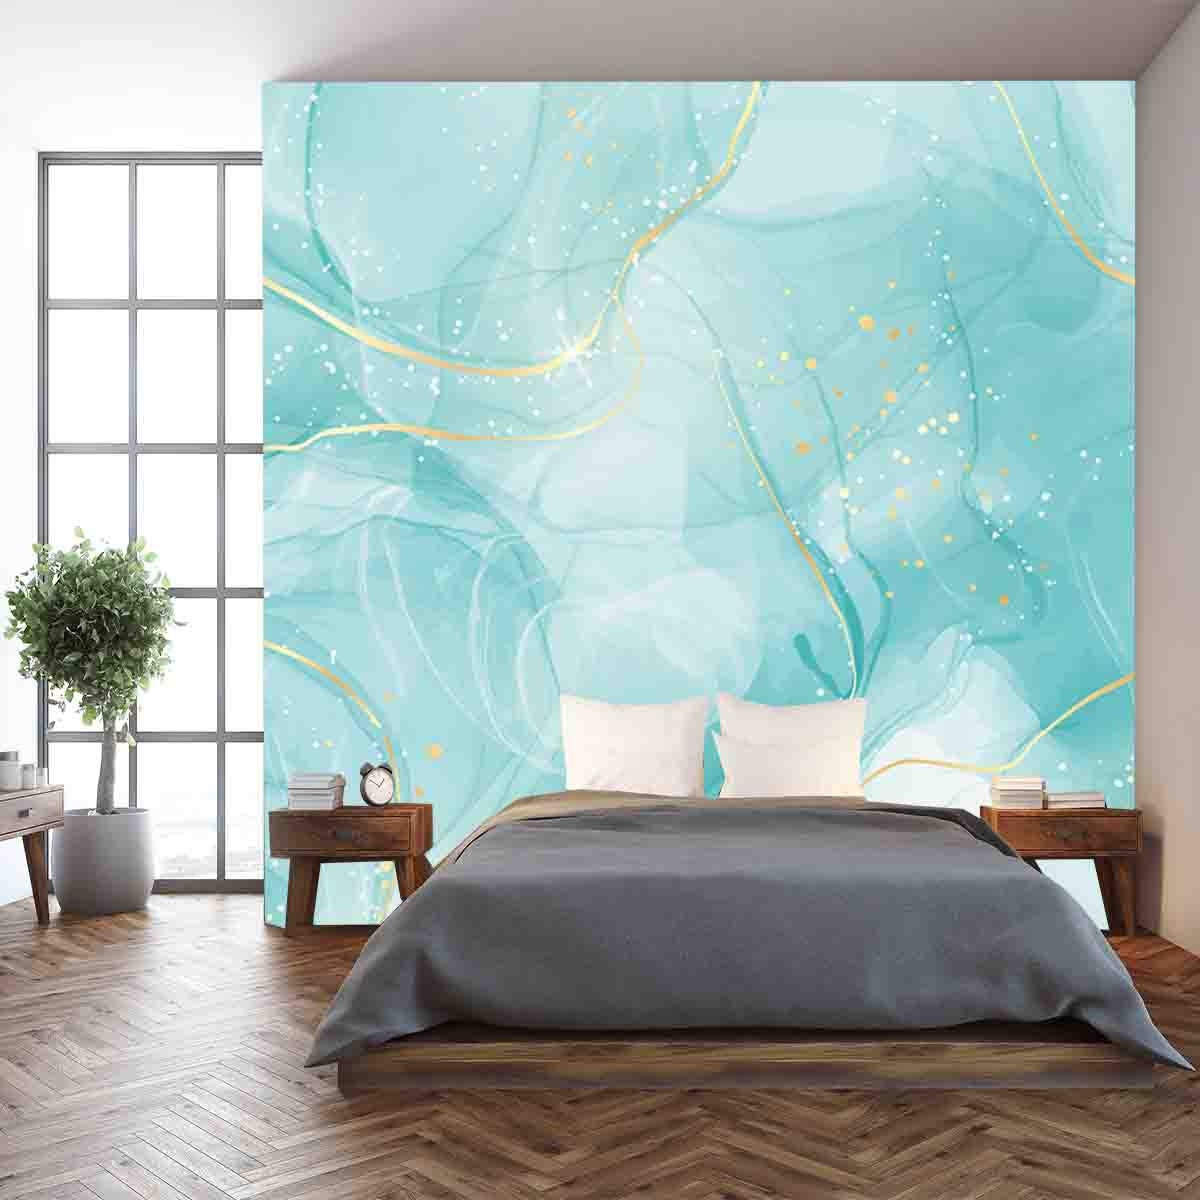 Pastel Cyan Mint Liquid Marble Watercolor Background with White Lines and Brush Stains Wallpaper Bedroom Mural